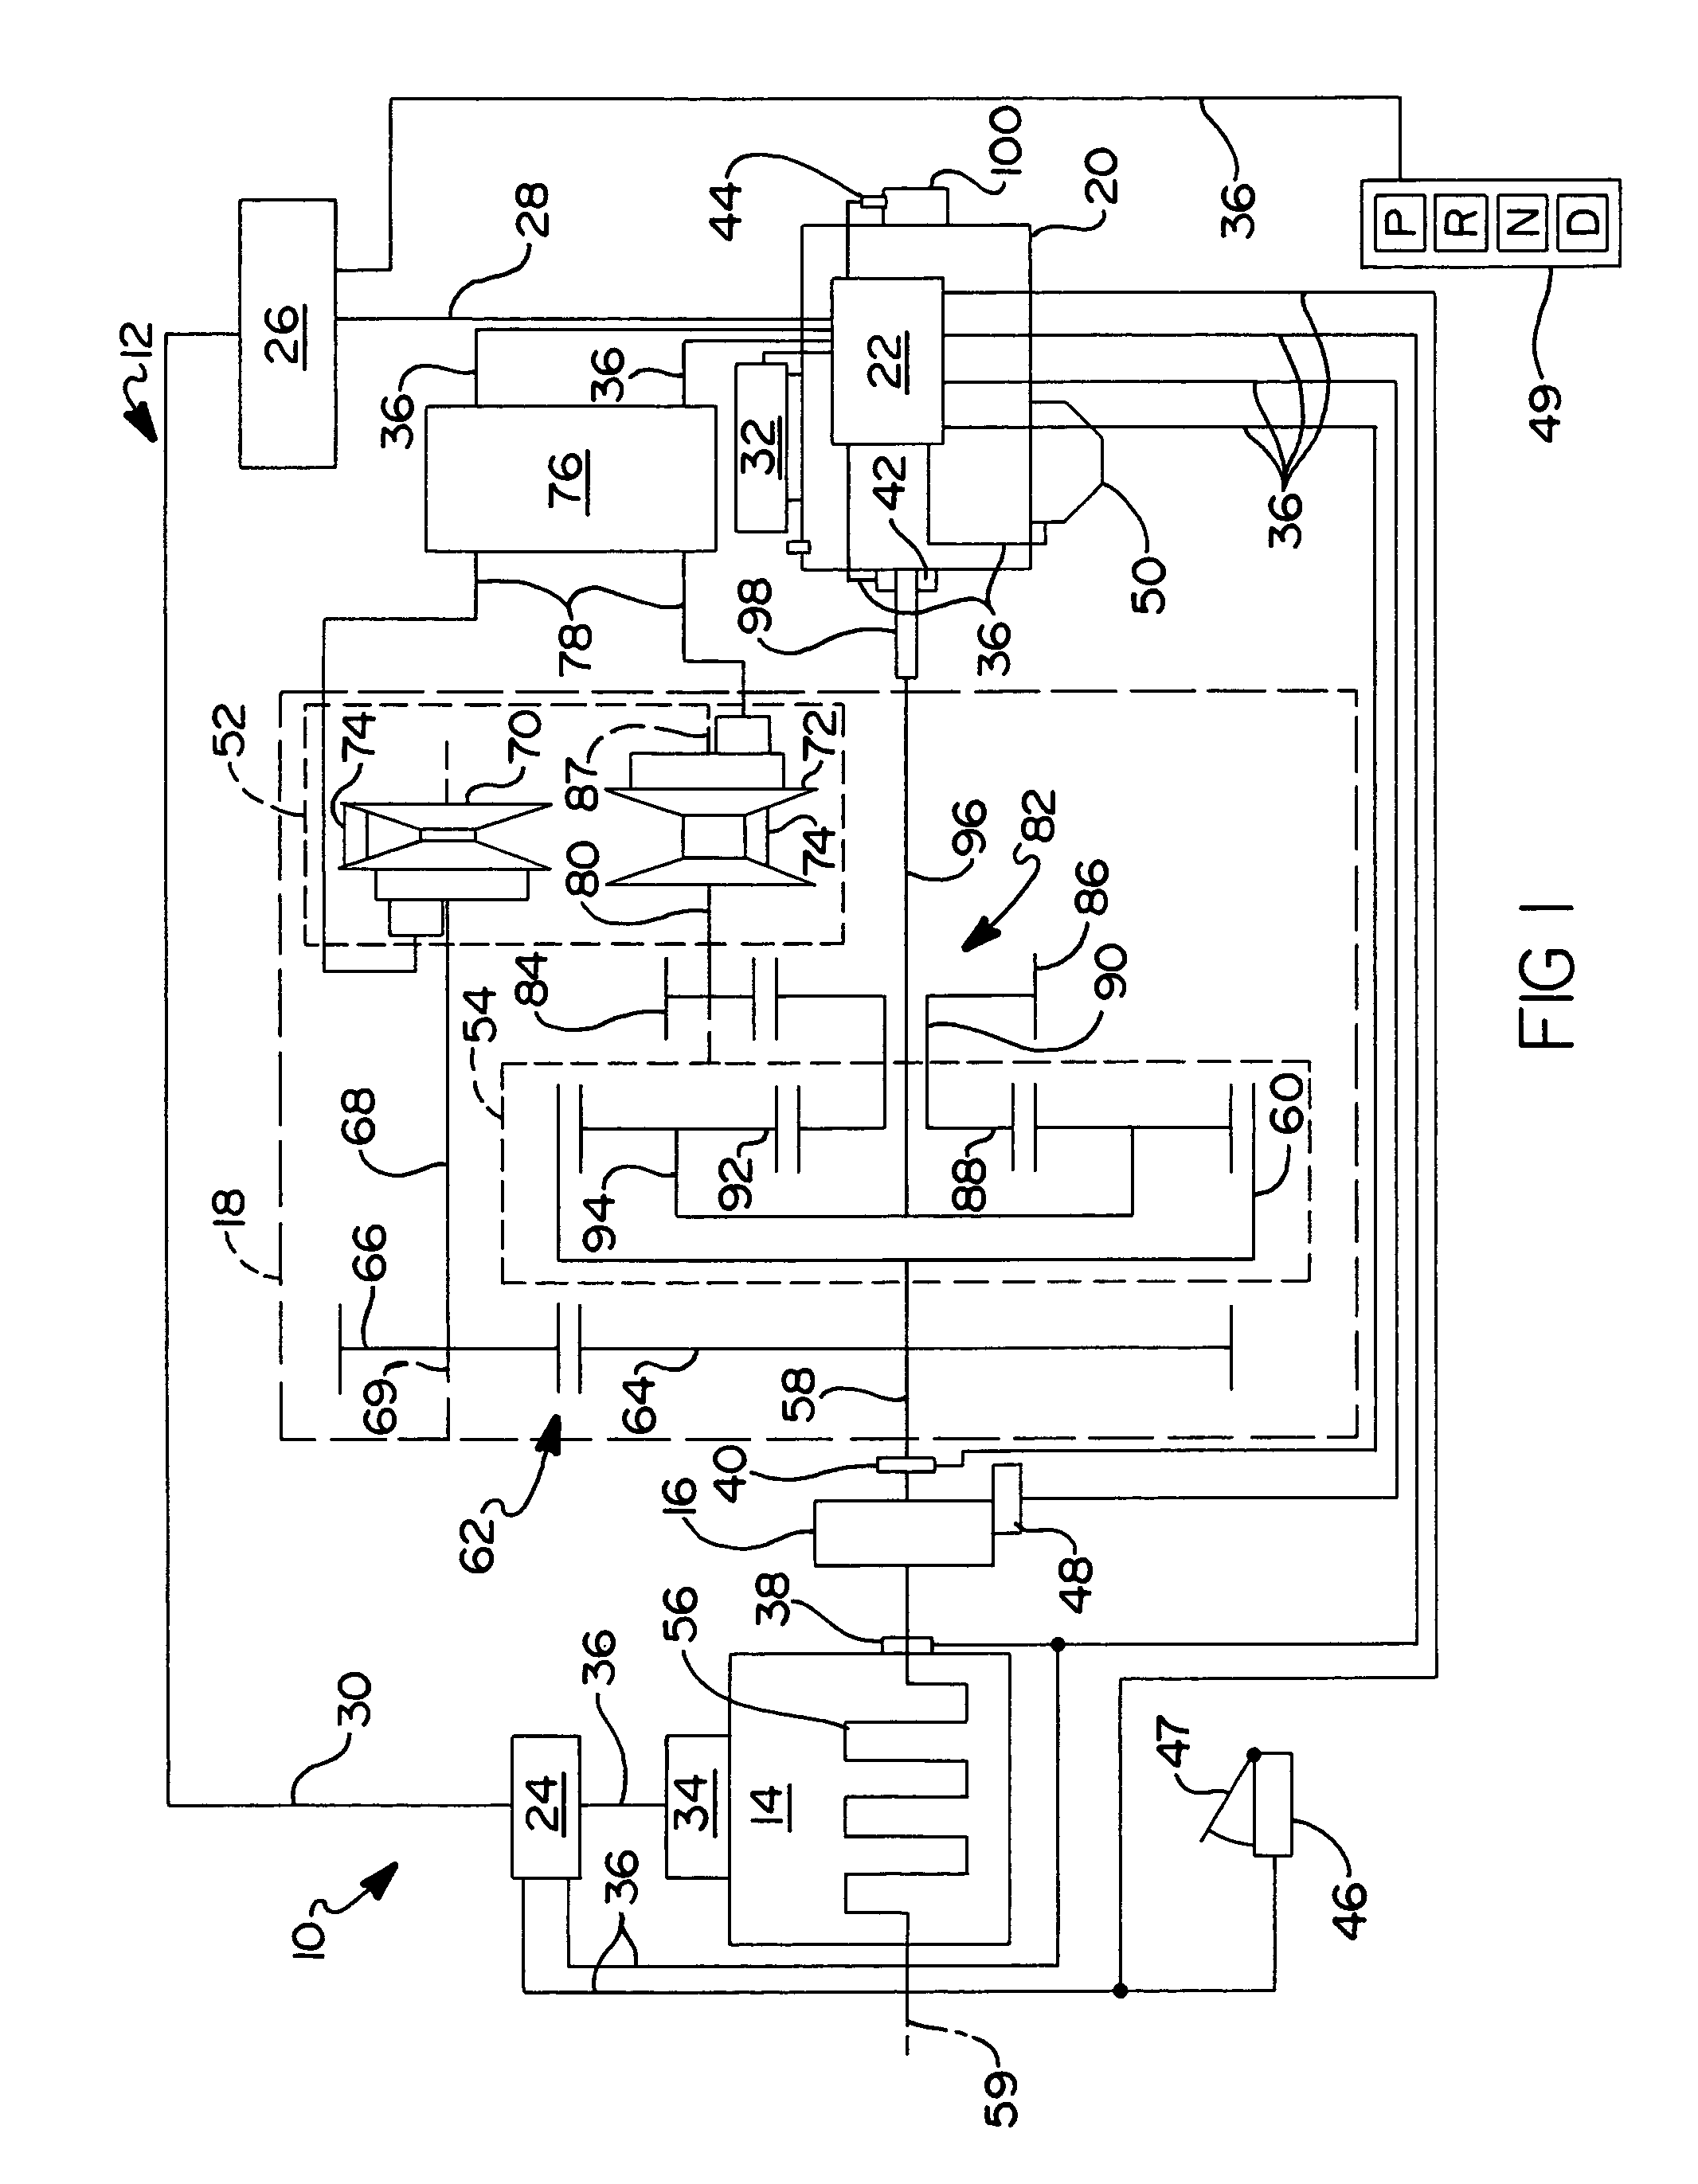 Continuously variable stepped transmission